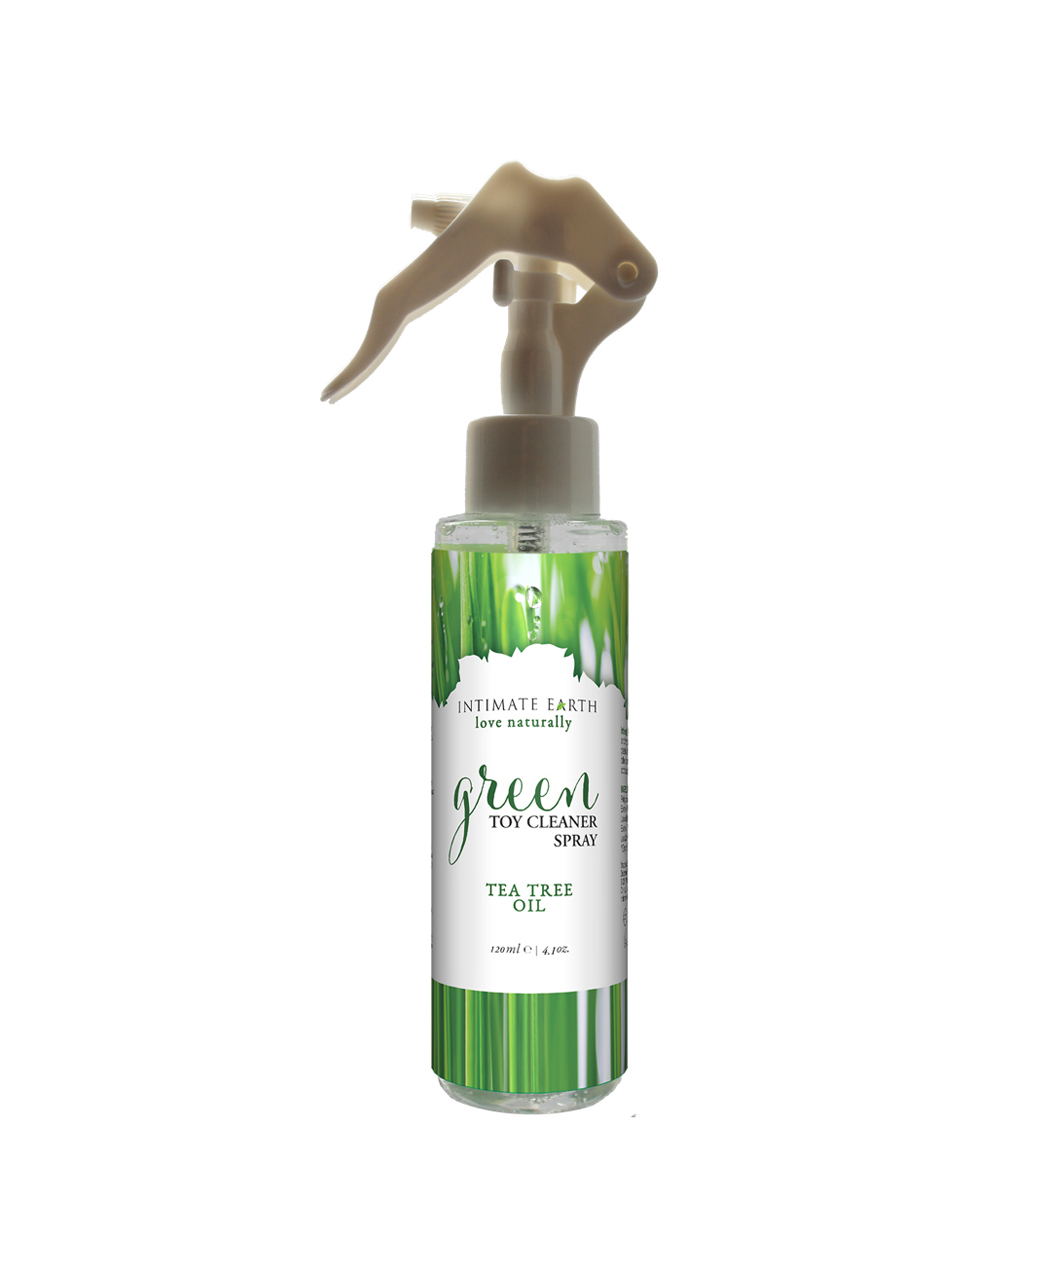 Intimate Earth Green toy cleaner spray (125 ml)